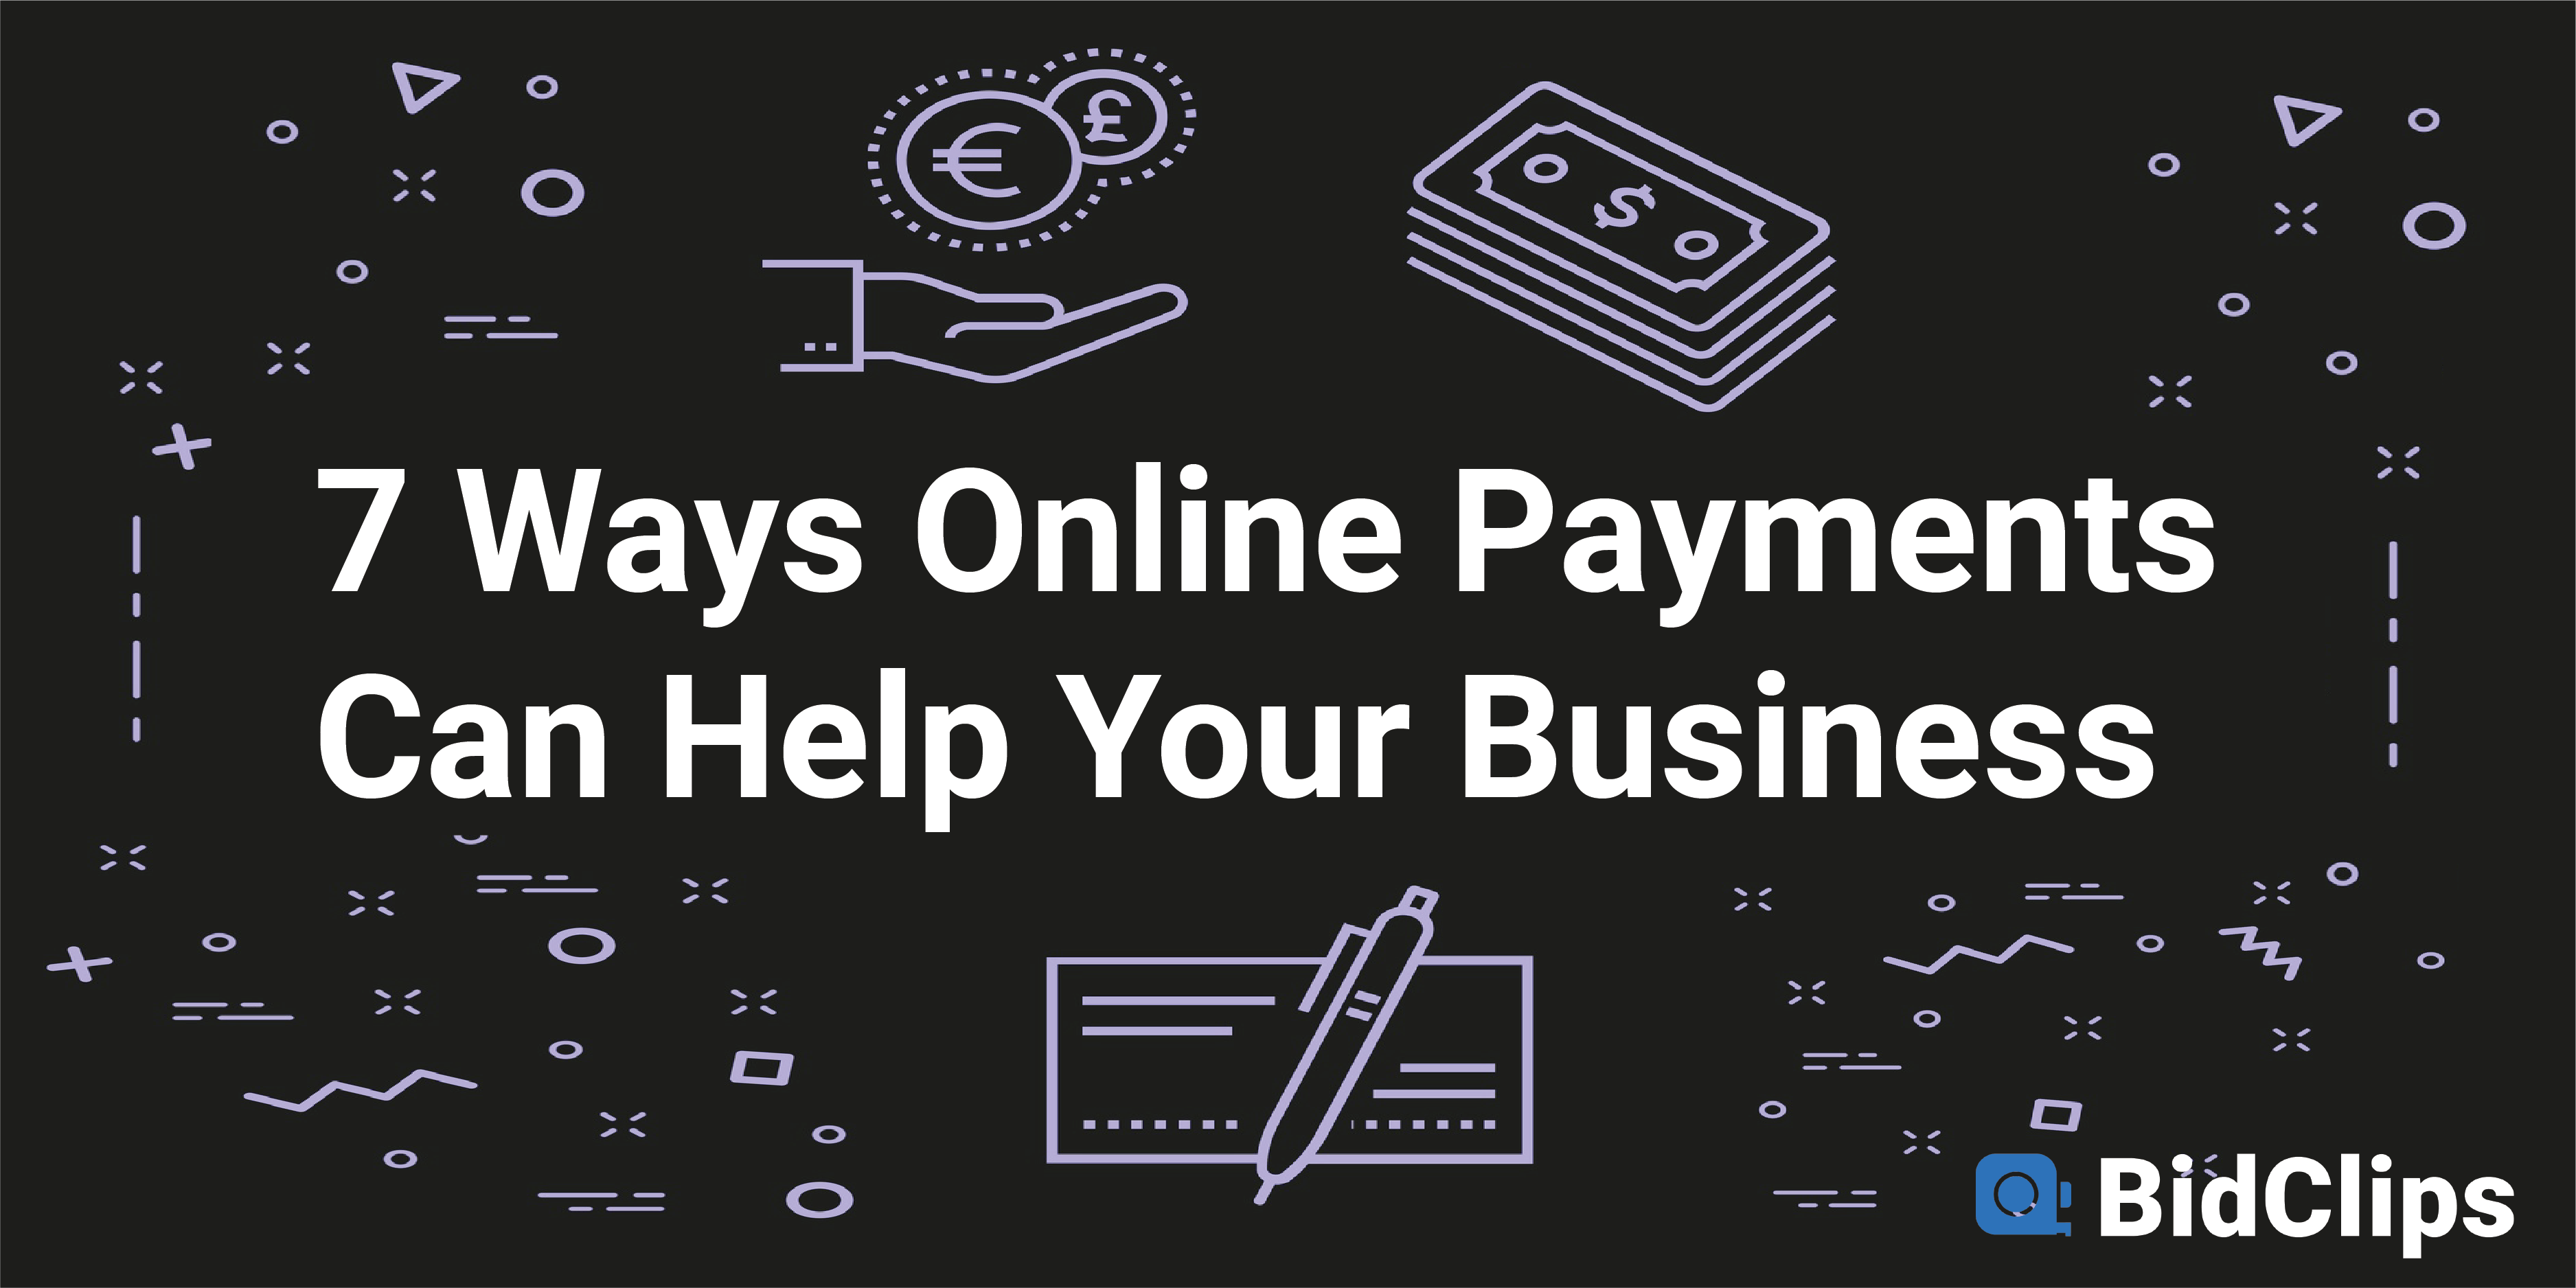 7 Ways Online Payments Can Help Your Business